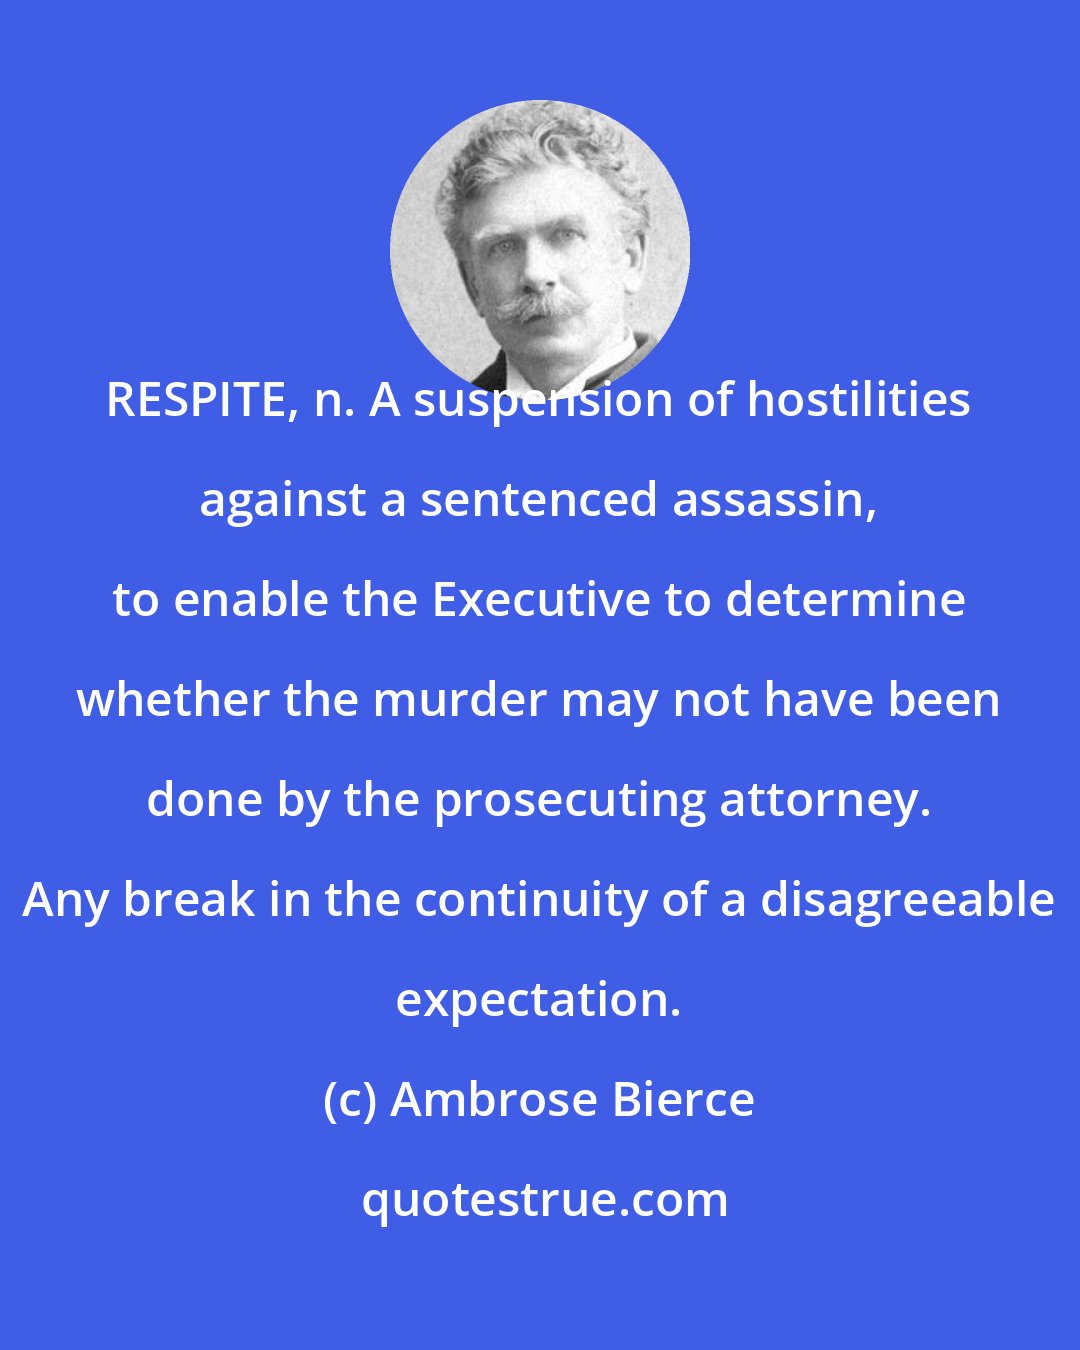 Ambrose Bierce: RESPITE, n. A suspension of hostilities against a sentenced assassin, to enable the Executive to determine whether the murder may not have been done by the prosecuting attorney. Any break in the continuity of a disagreeable expectation.